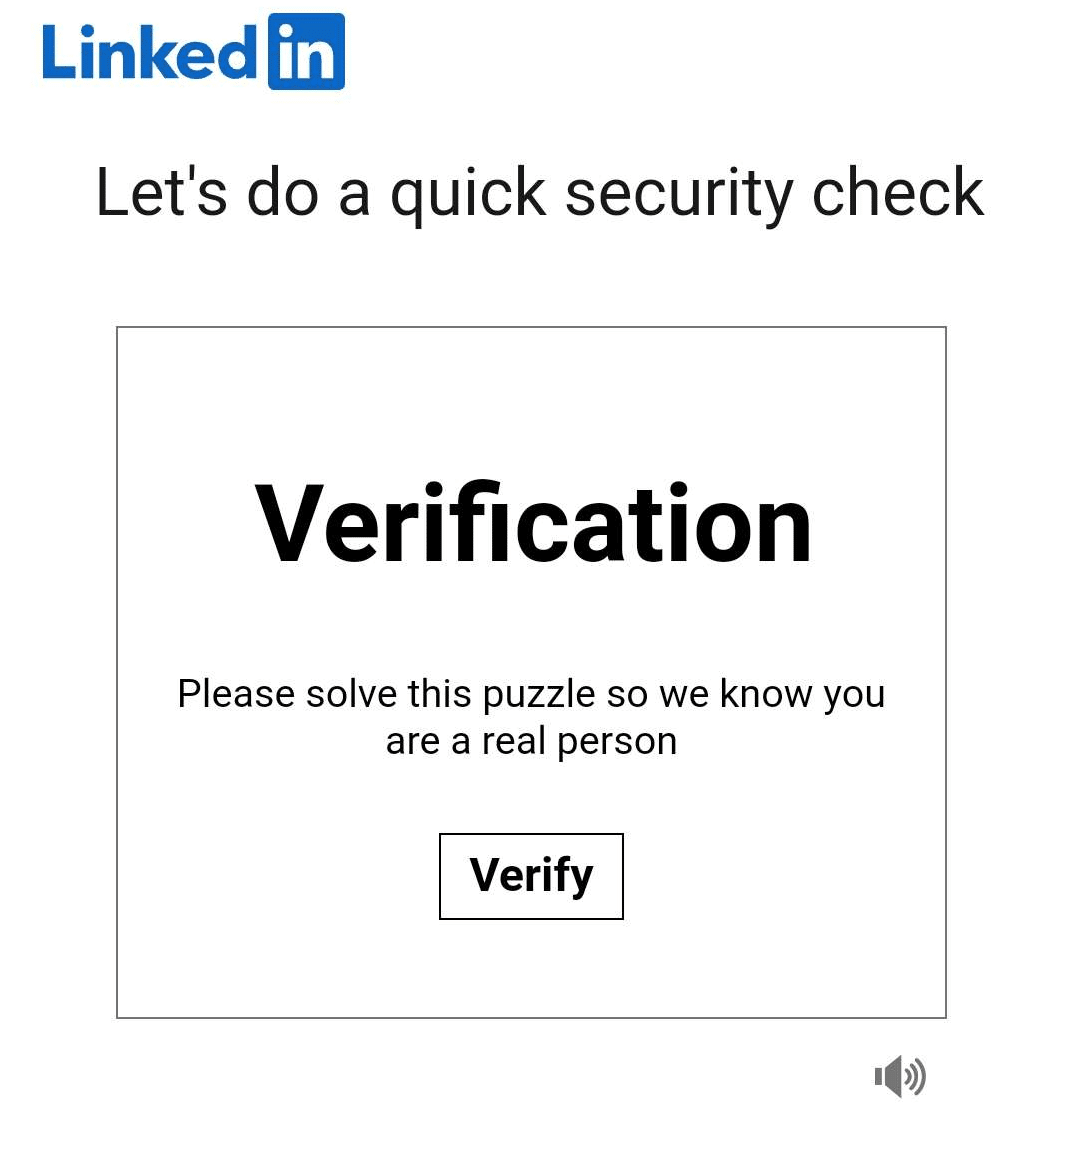 Reset your LinkedIn account password on your smartphone to fix can't log in or sign in to LinkedIn